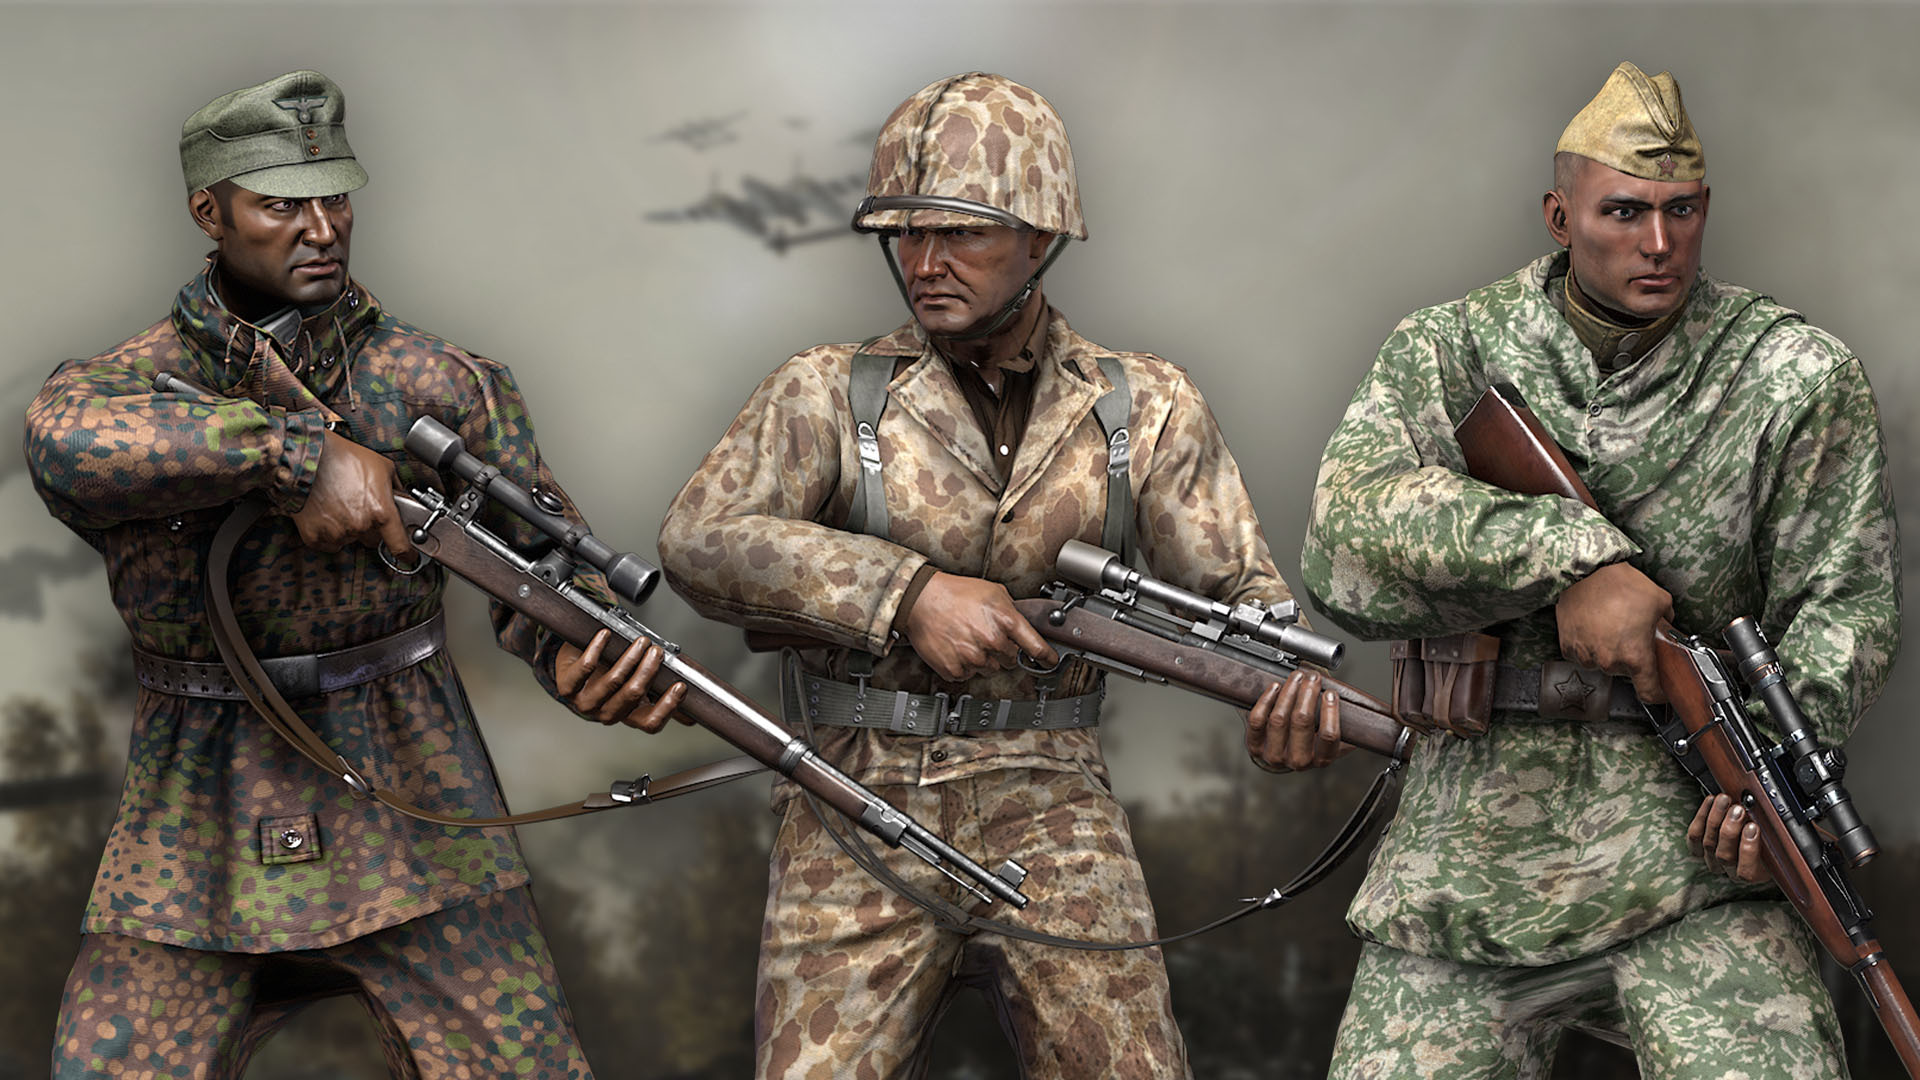 Heroes and Generals World War 2 Factions FULL MODPACK ARCHIVE